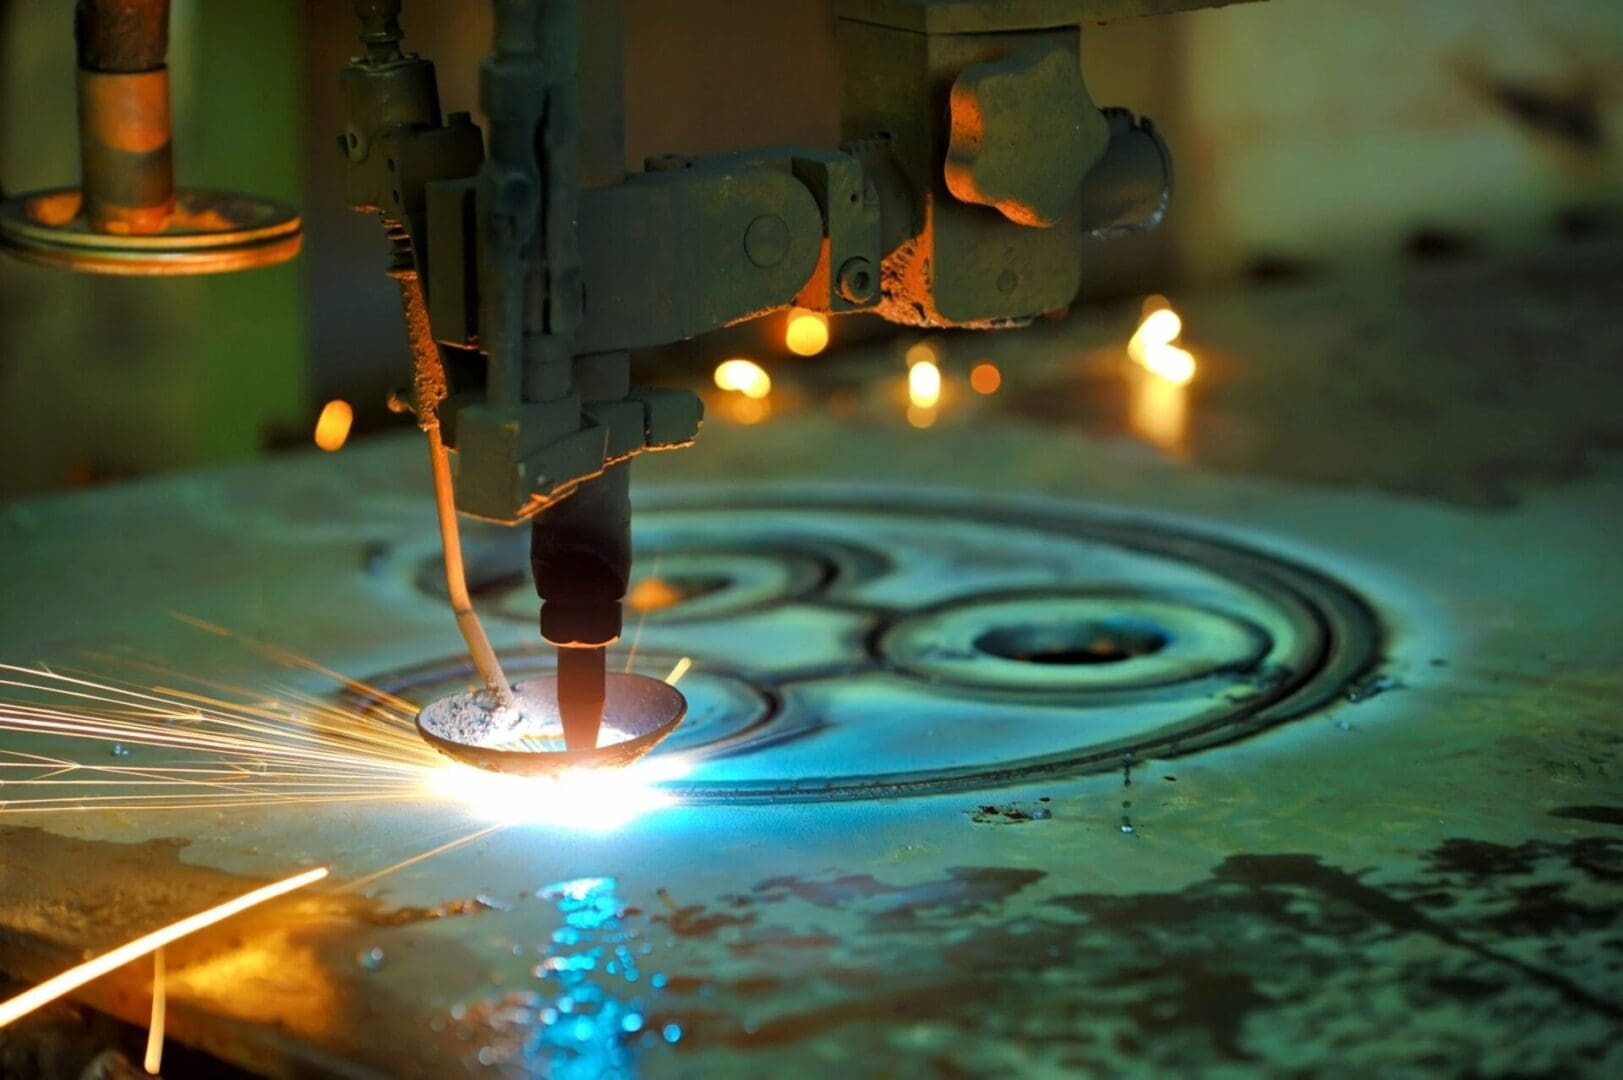 A machine is cutting metal with blue light.